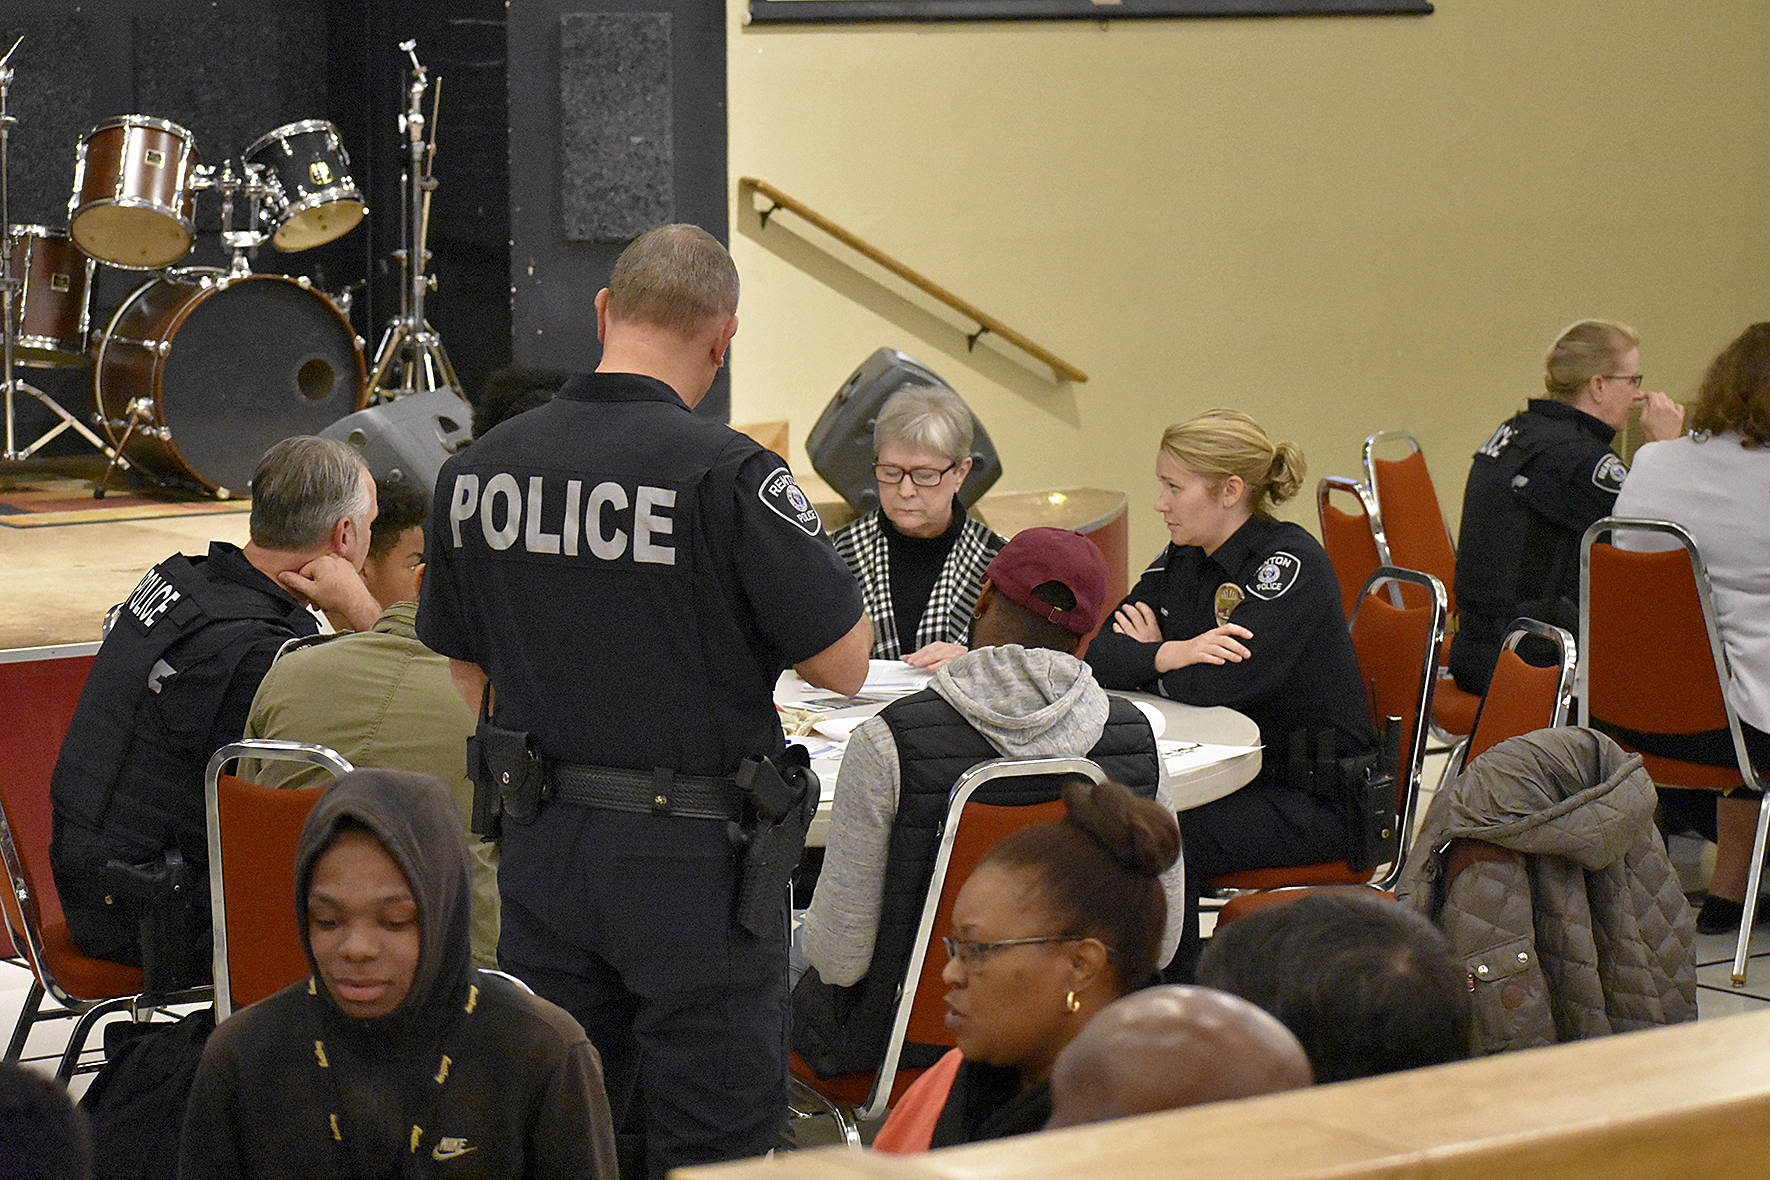 Photo by Haley Ausbun                                Discussion and solutions between police and community relationships were the topic of the Unity Forum hosted by Renton African American Pastor Group, City of Renton and Renton Police Department.